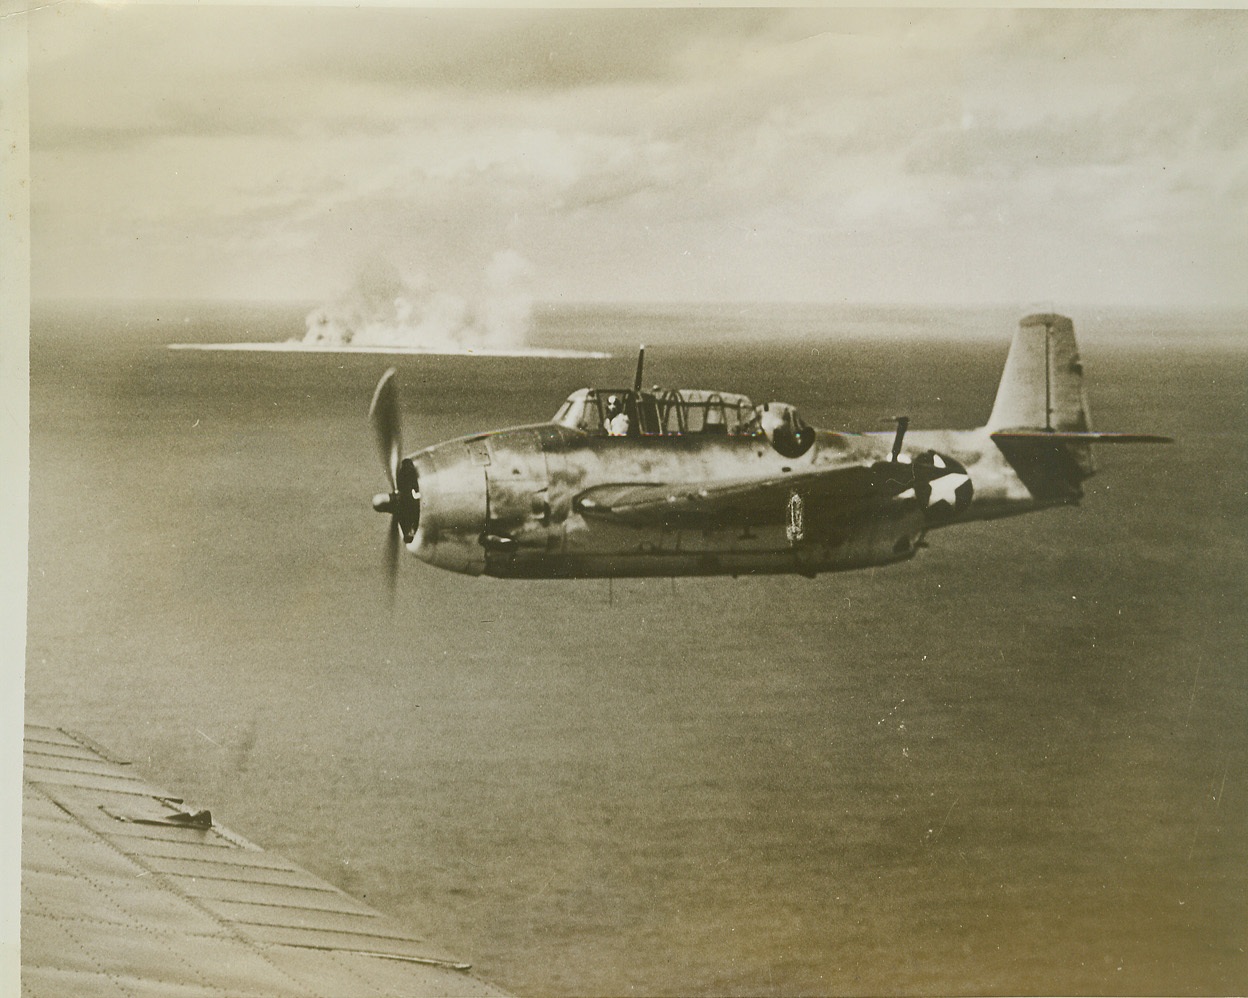 Navy Blasts Marcus Island, 9/28/1943. Smoke from burning Japanese installations covers tiny Marcus Island as a Grumman Avenger torpedo bomber, which has just dropped its load on the enemy base, returns to its carrier. The Japanese island base, 990 miles southeast of Tokyo, was attacked by a U.S. Navy task force on September 1, 1943, and 80% of the enemy installations were reported destroyed. Credit: (U.S. Navy Official Photo from ACME);